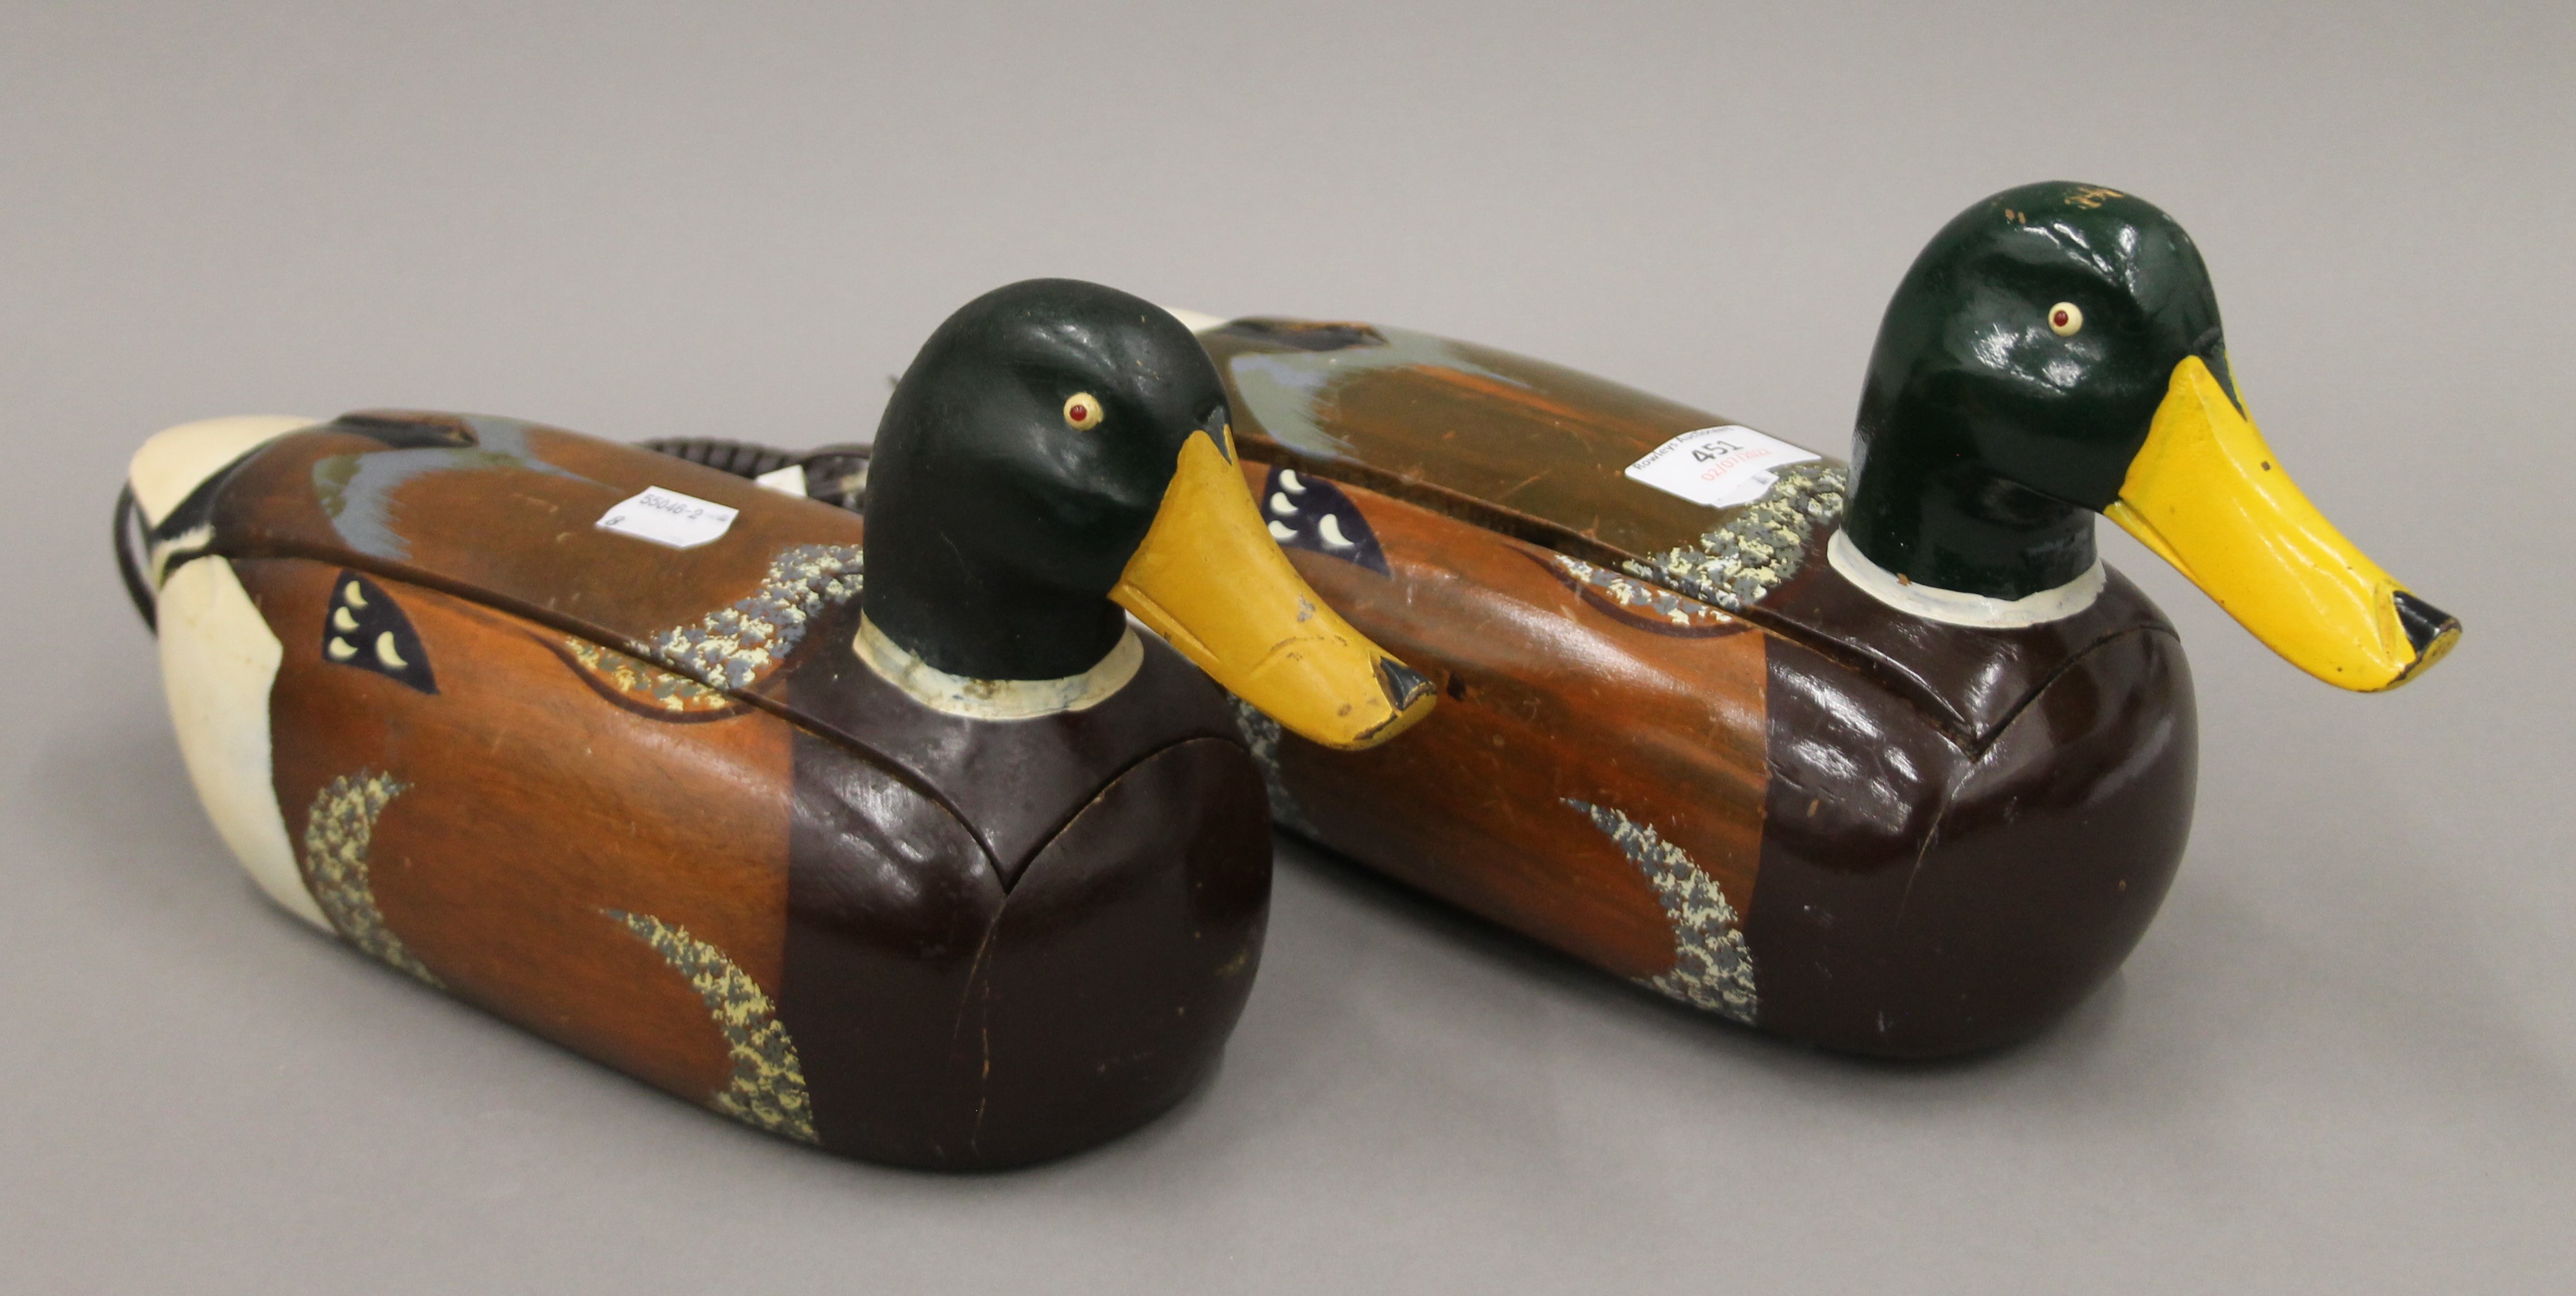 Two duck form telephones.